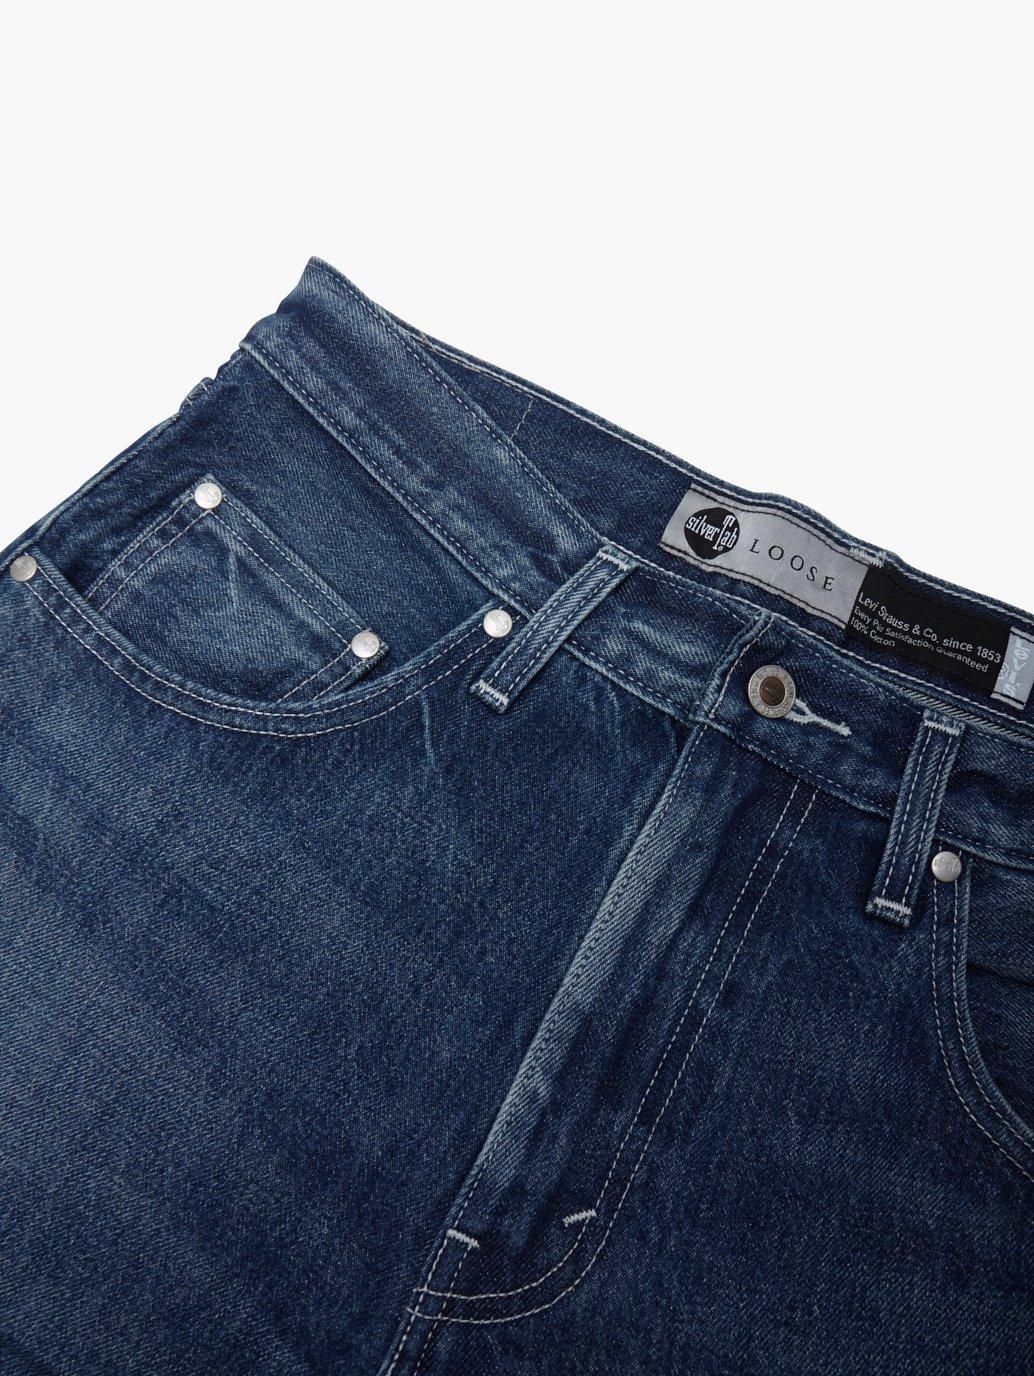 Buy Levi's® Men's SilverTab Loose | Levi’s® Official Online Store MY